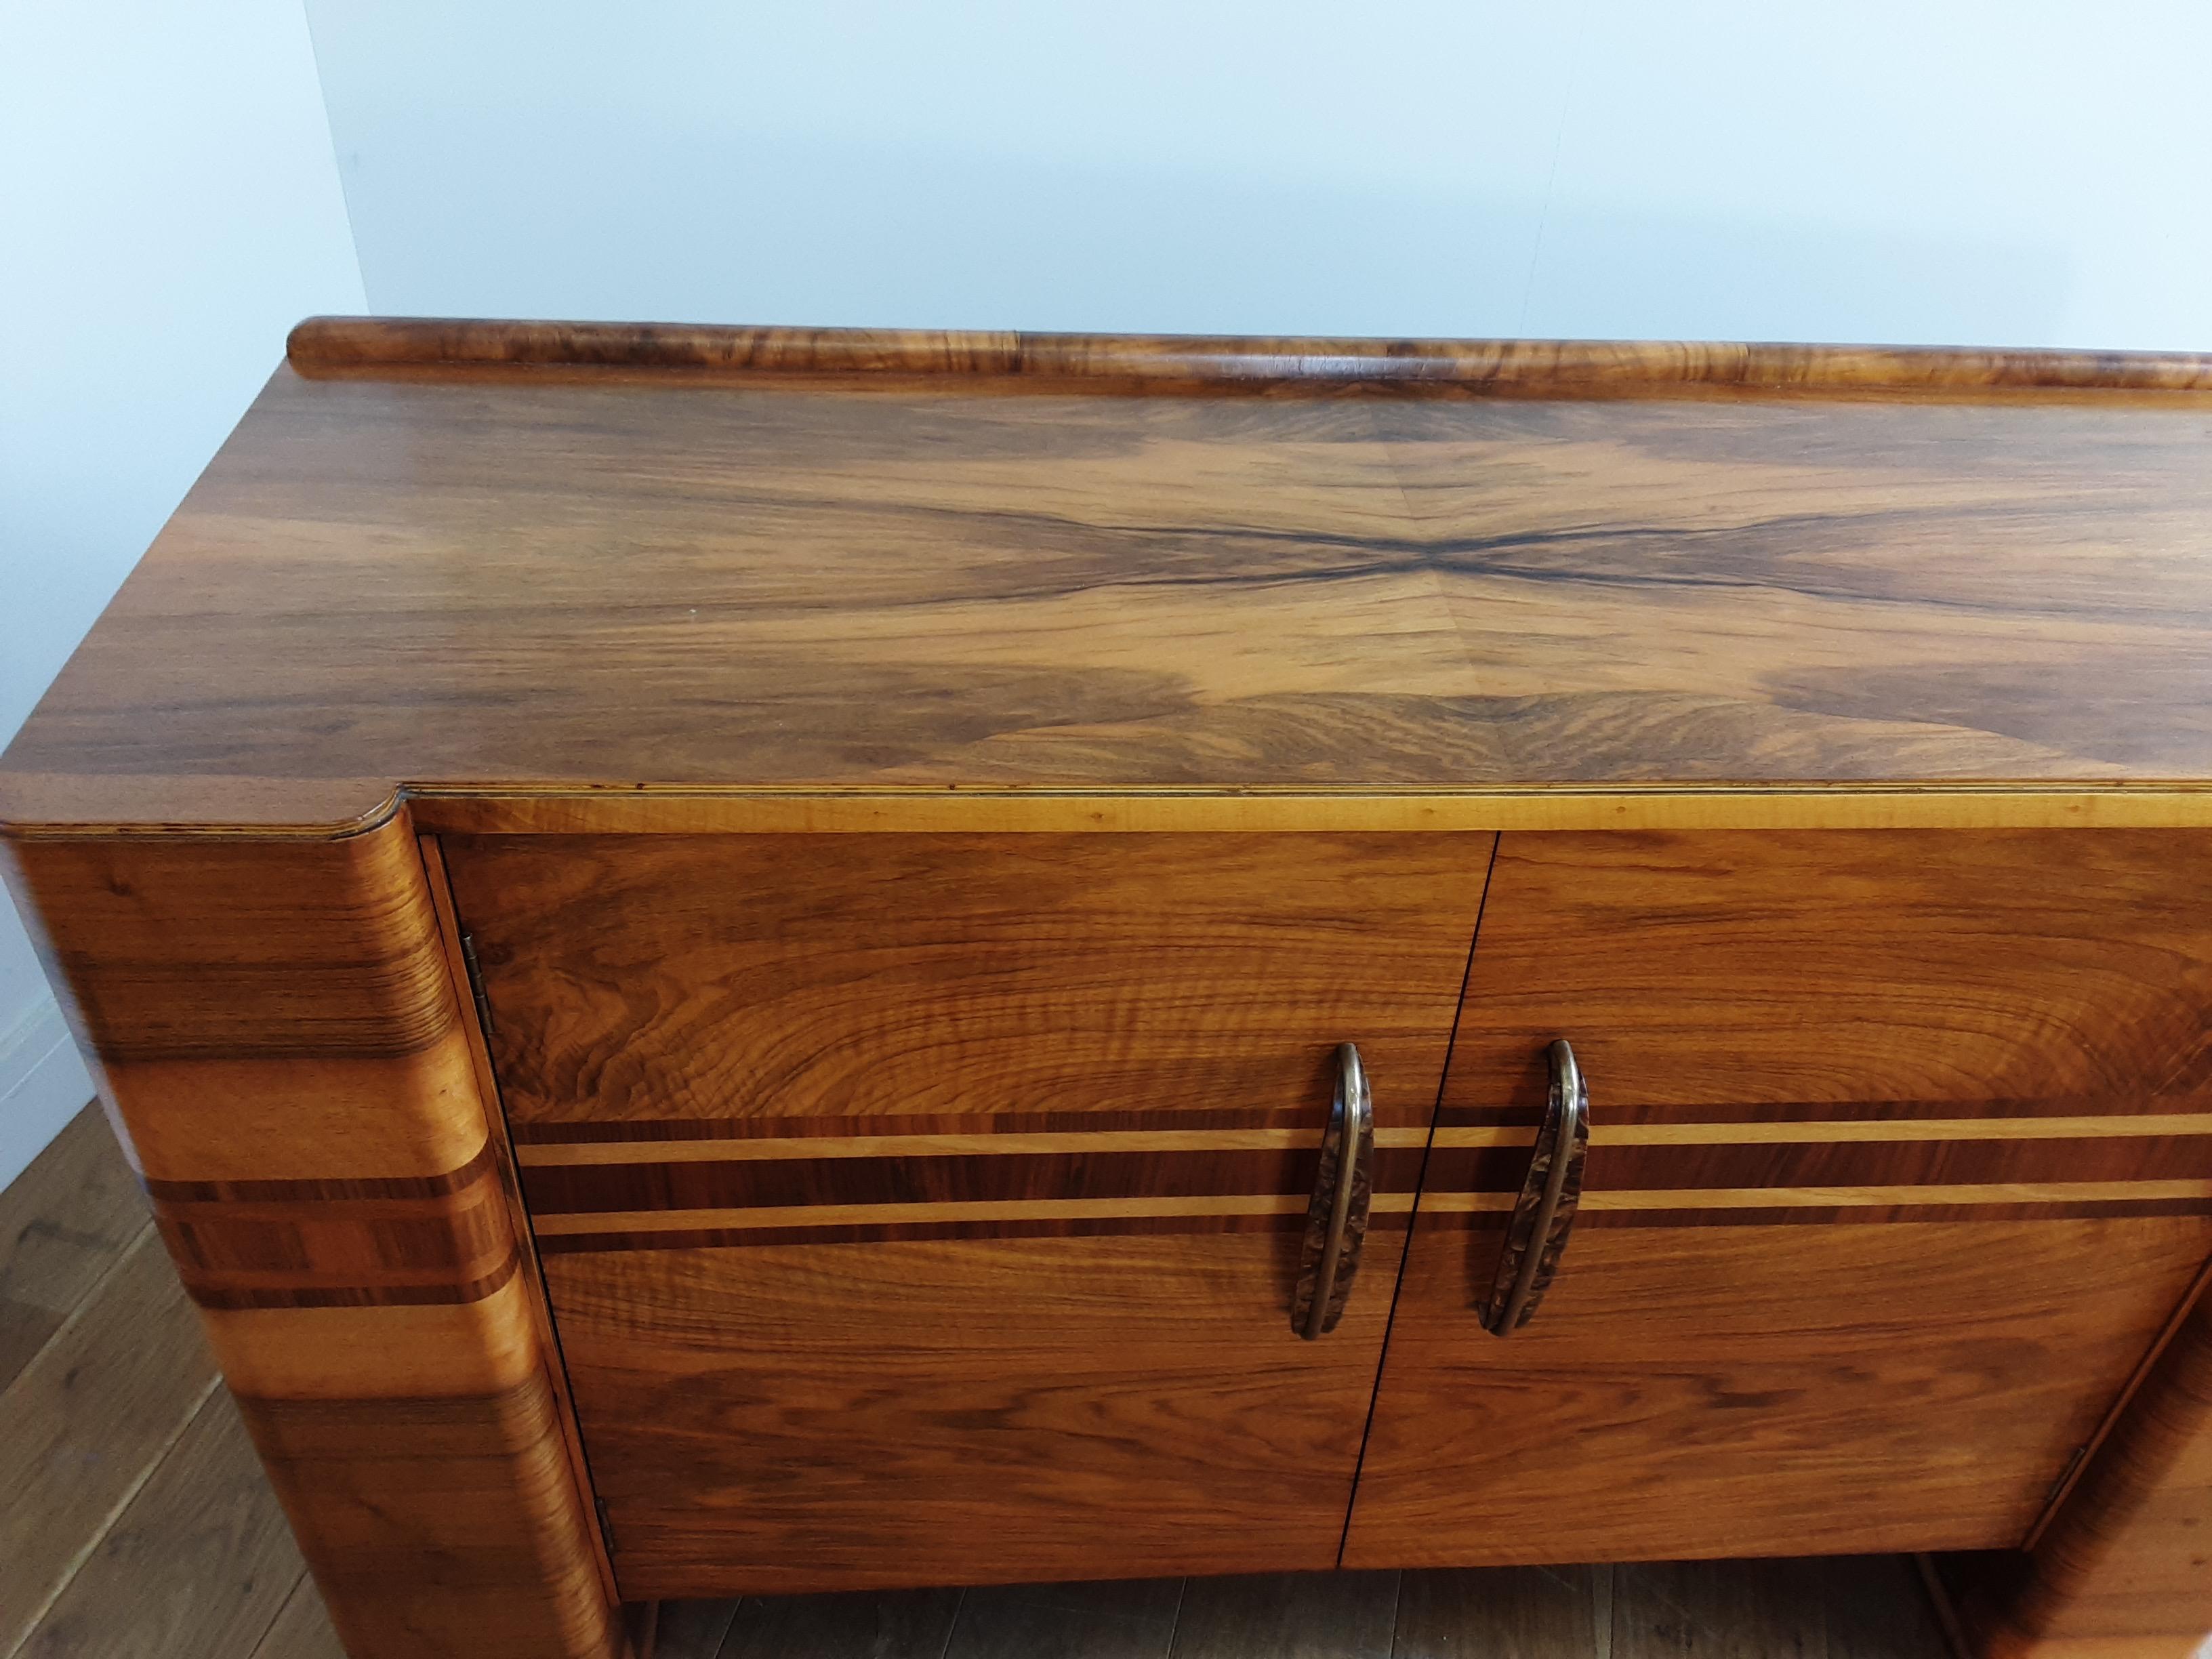 Scottish Art Deco Sideboard in a Golden Brown Walnut with a Modernist Design For Sale 2